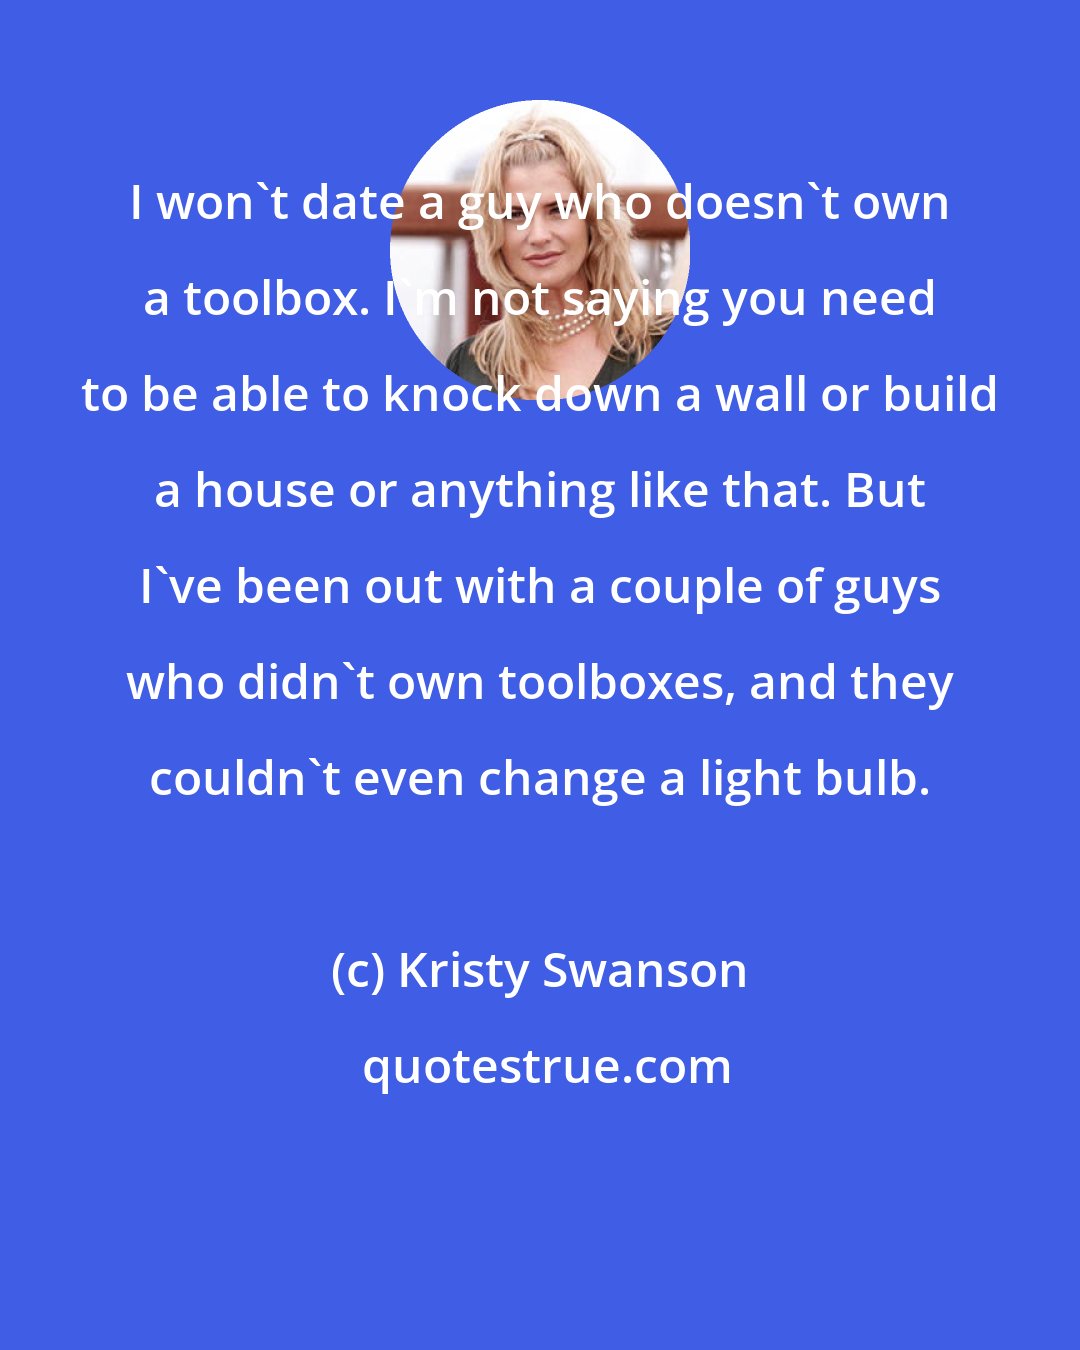 Kristy Swanson: I won't date a guy who doesn't own a toolbox. I'm not saying you need to be able to knock down a wall or build a house or anything like that. But I've been out with a couple of guys who didn't own toolboxes, and they couldn't even change a light bulb.